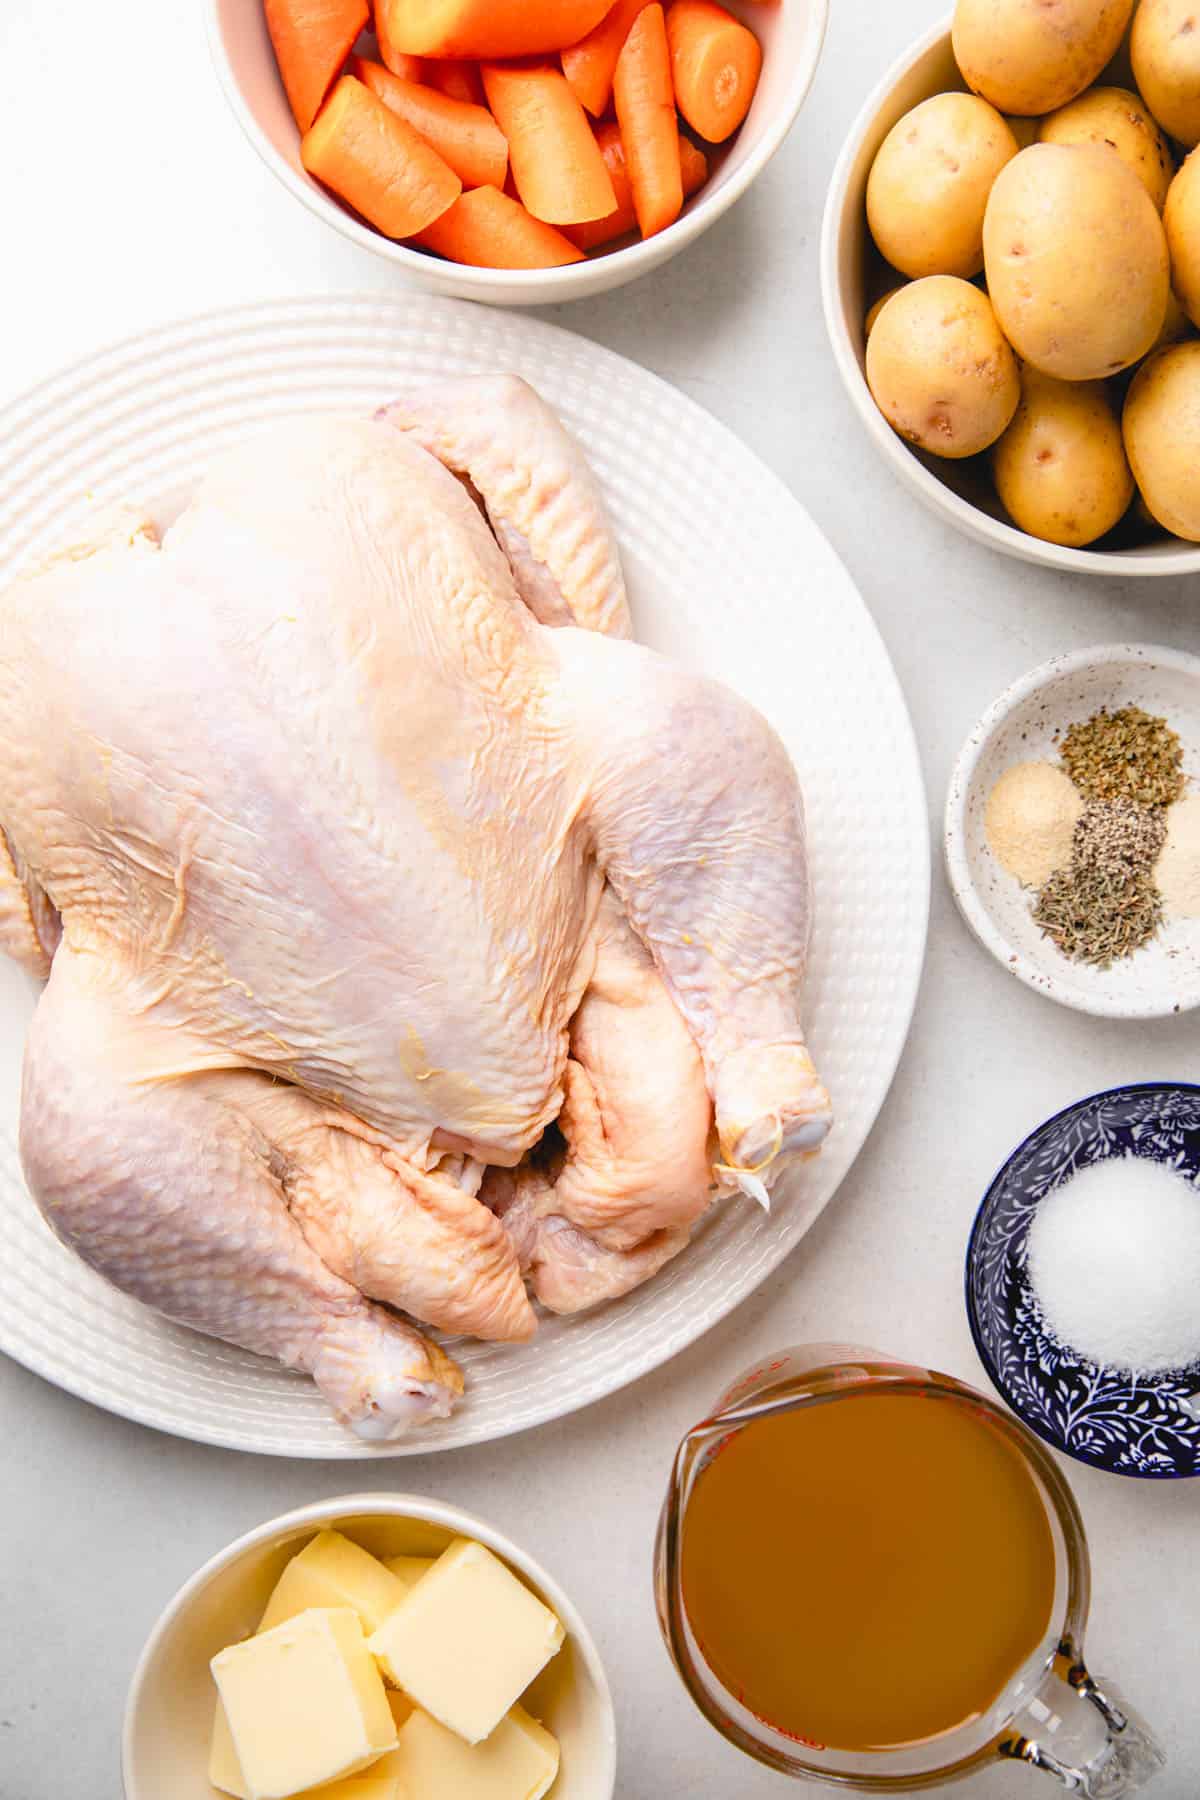 Ingredients to make whole roasted chicken with vegetables.